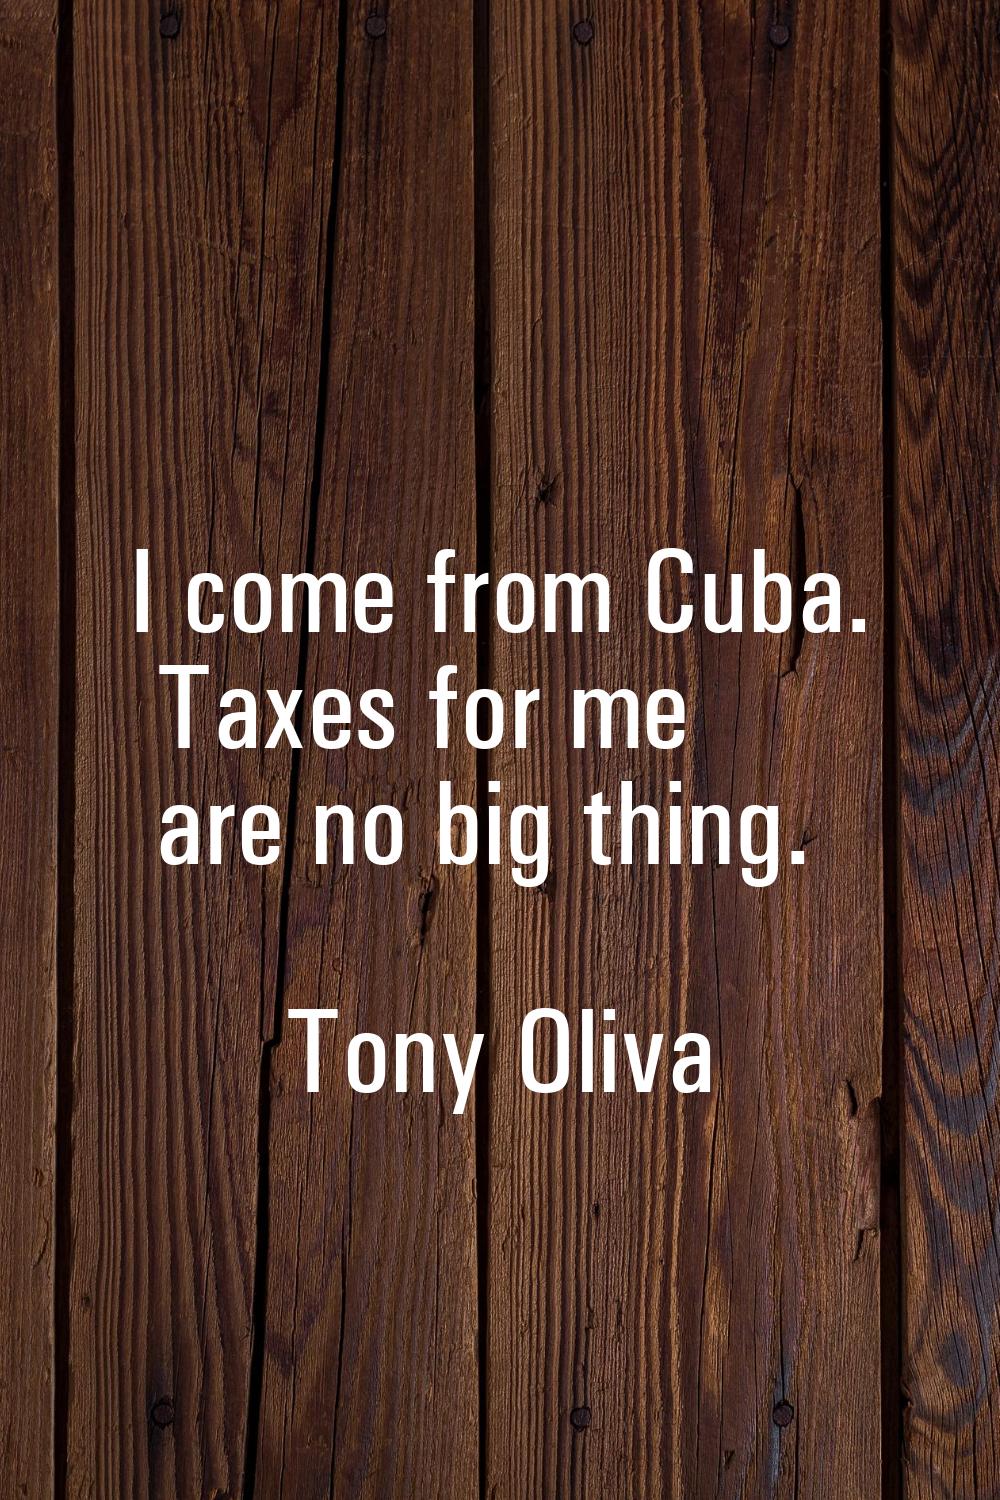 I come from Cuba. Taxes for me are no big thing.